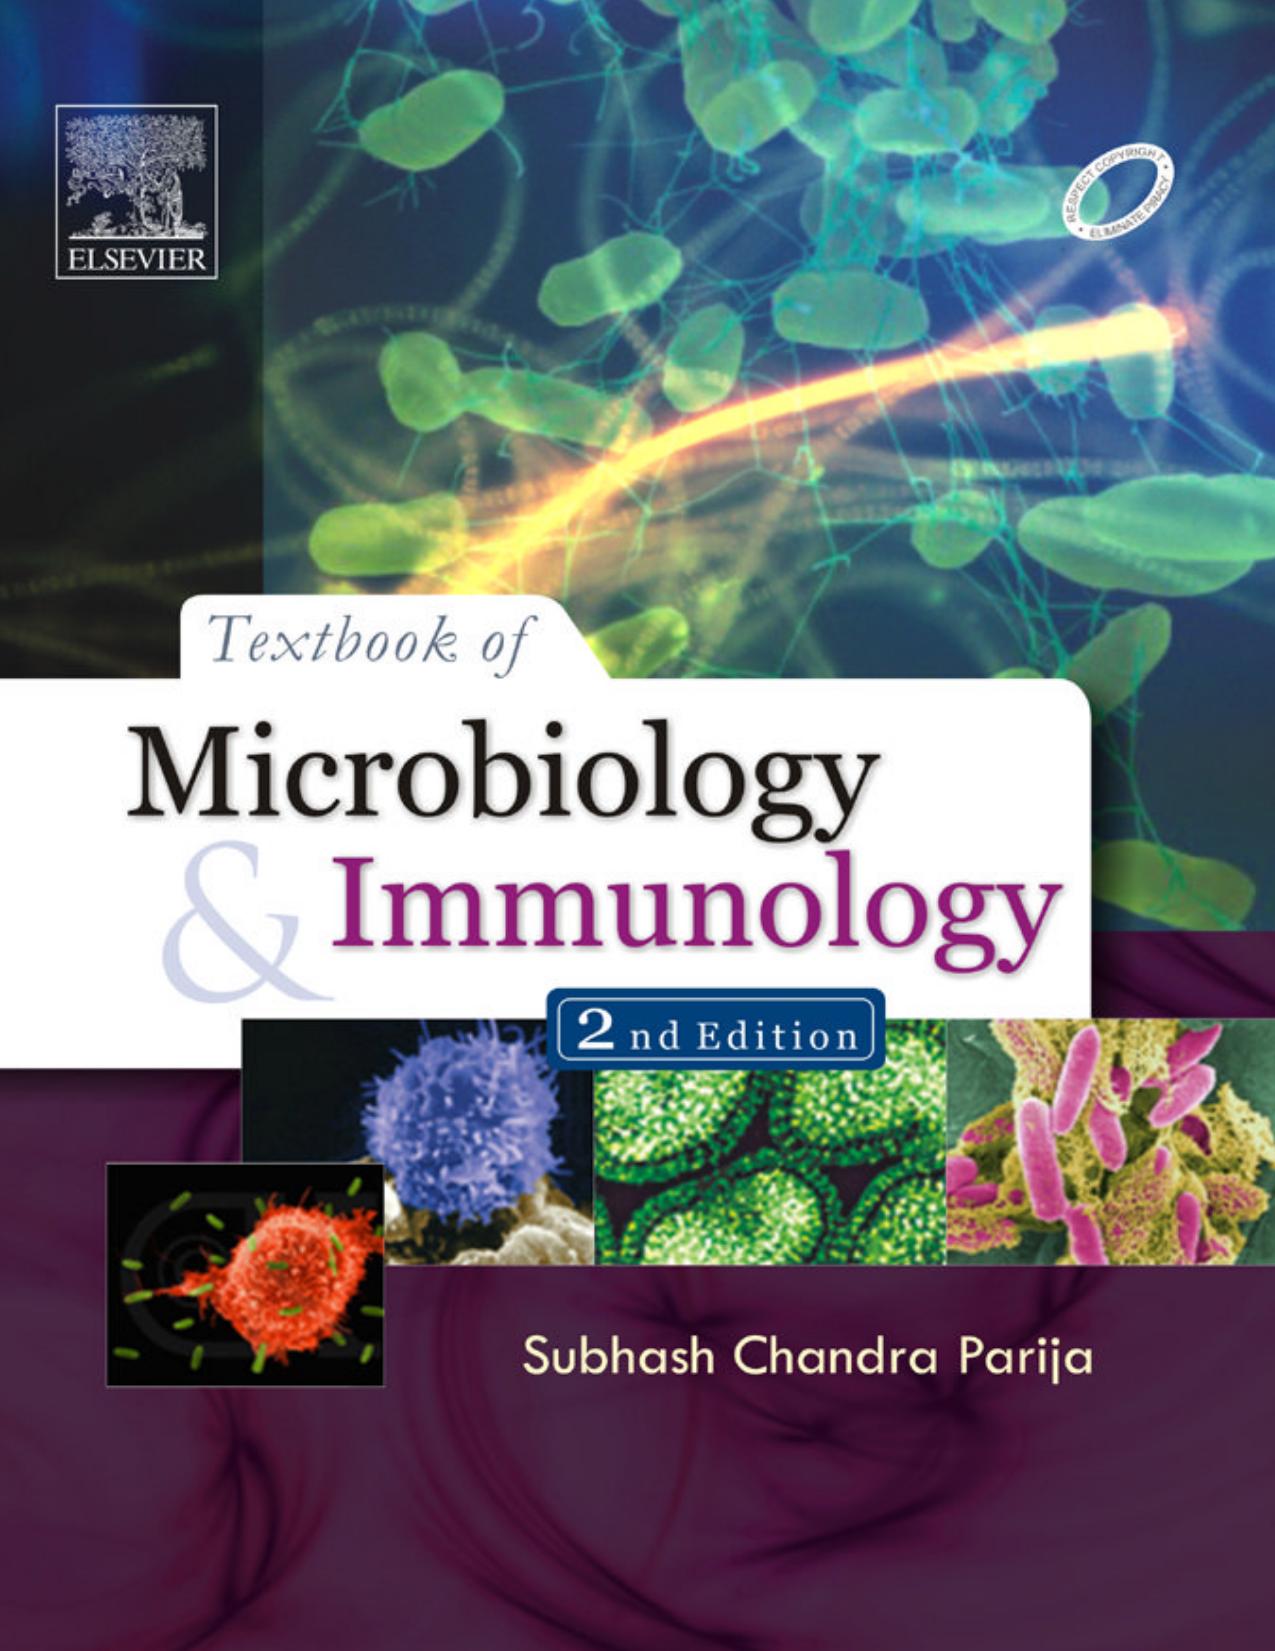 Microbiology and Immunology Textbook of 2nd Edition 2012